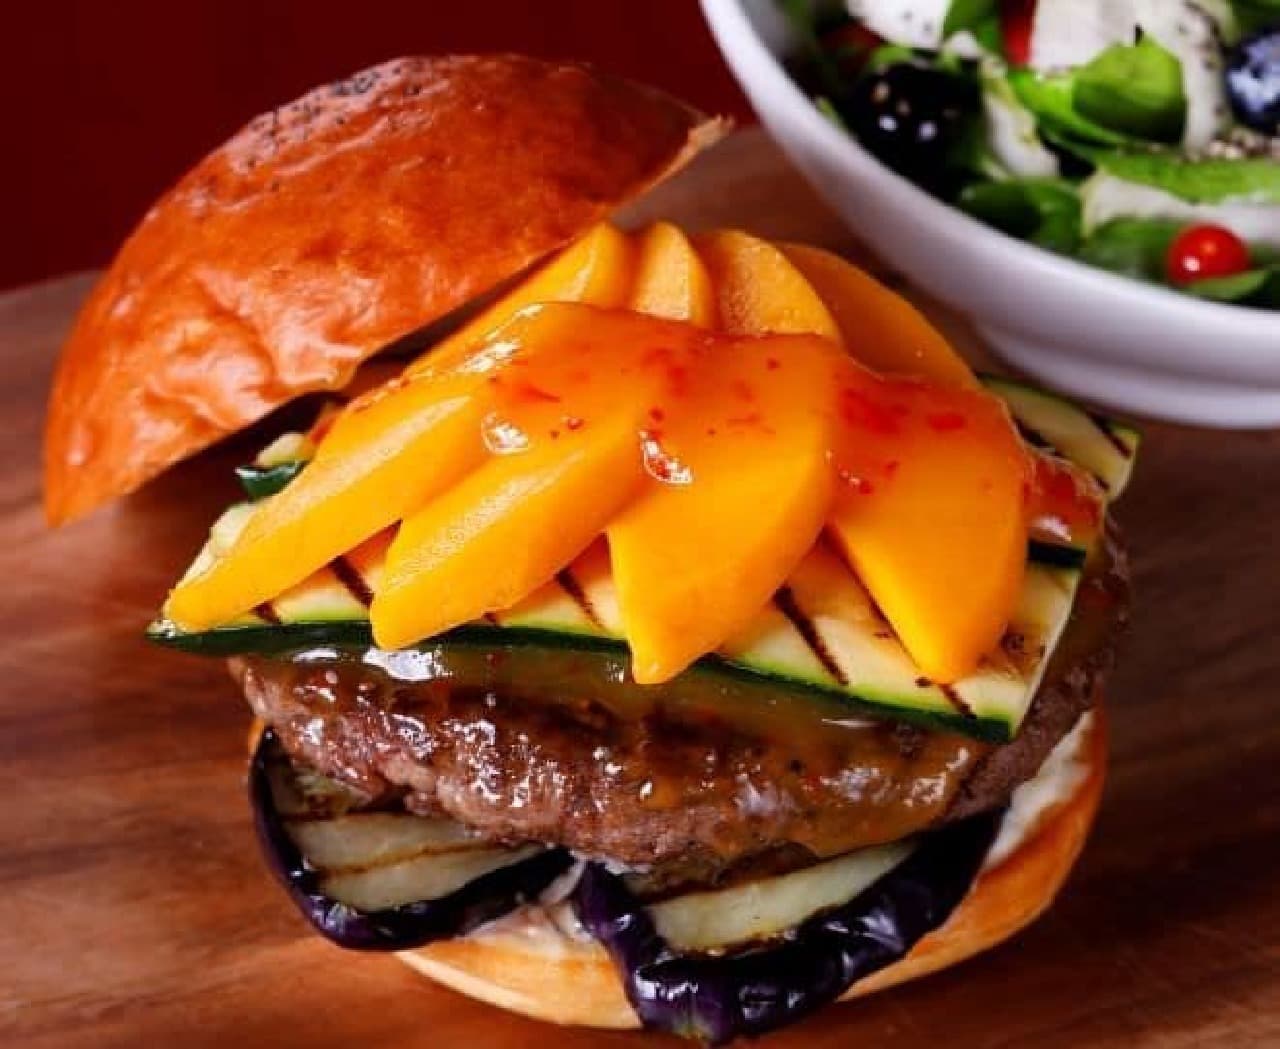 "Peach & Mango Fair", which offers a limited-time menu using mango and peach, is being held at Hotel New Otani